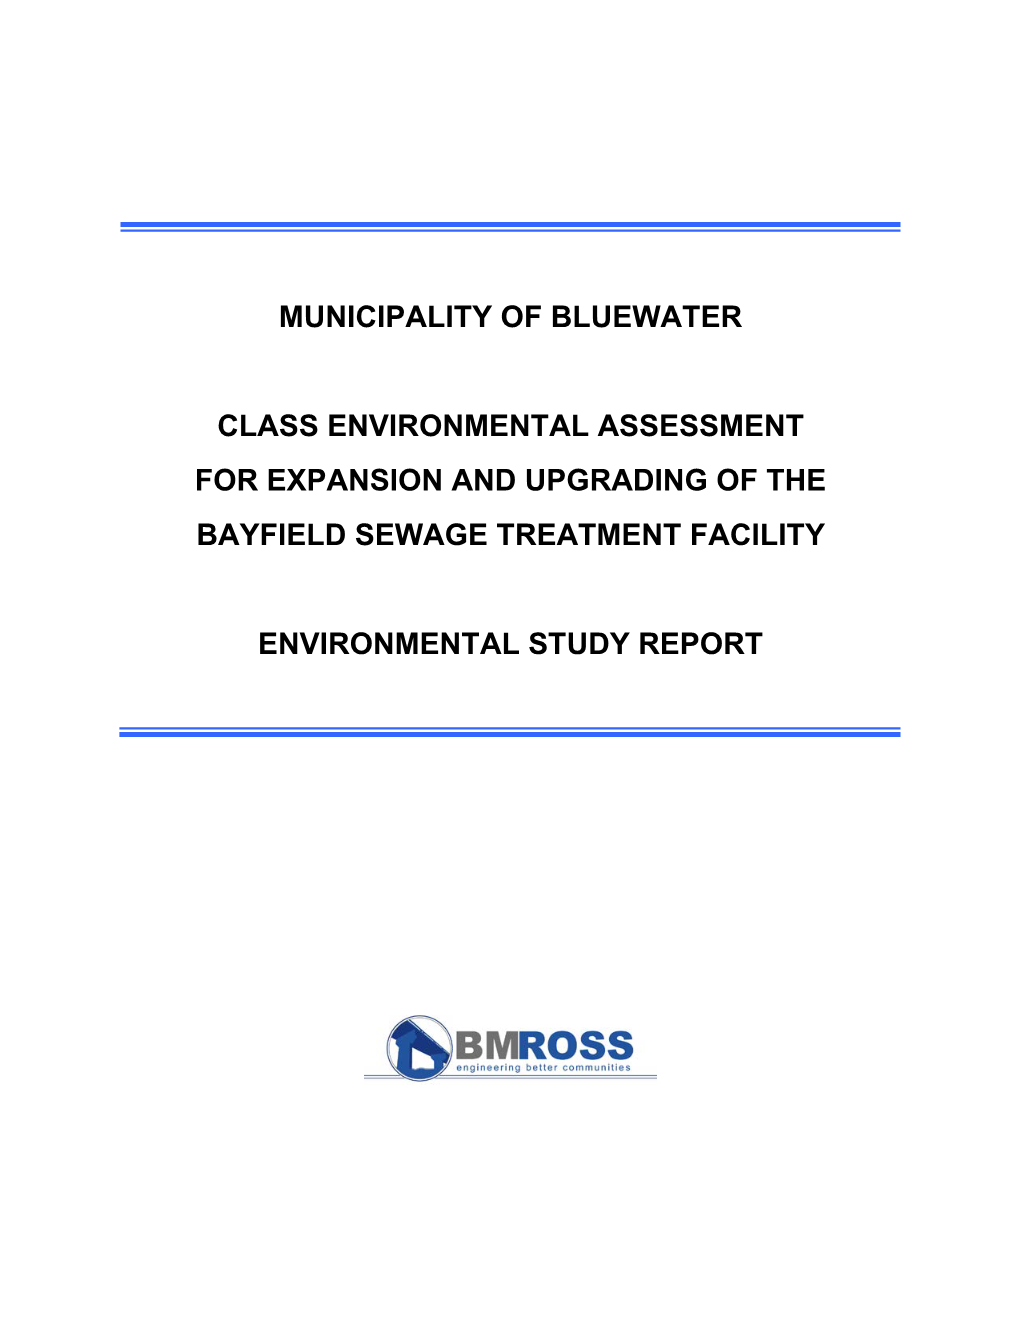 Class EA for Bayfield WWTF Expansion Environmental Study Report